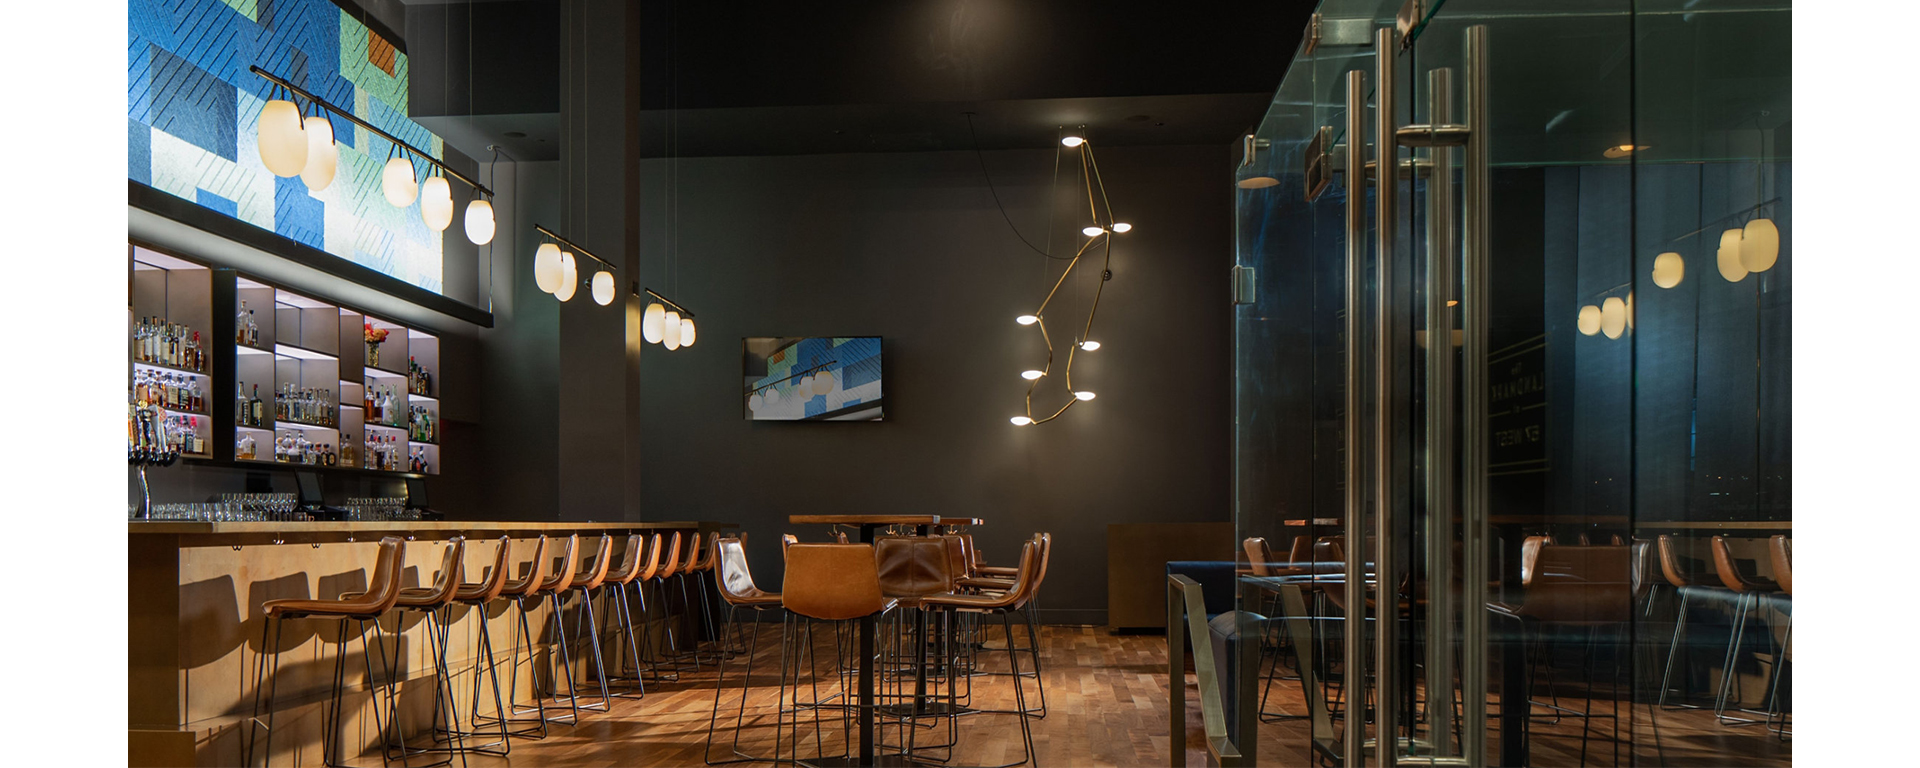 Moody dark interior of restaurant with wood floors, high ceilings, modern lighting, and leather chairs at wood tables and bar.